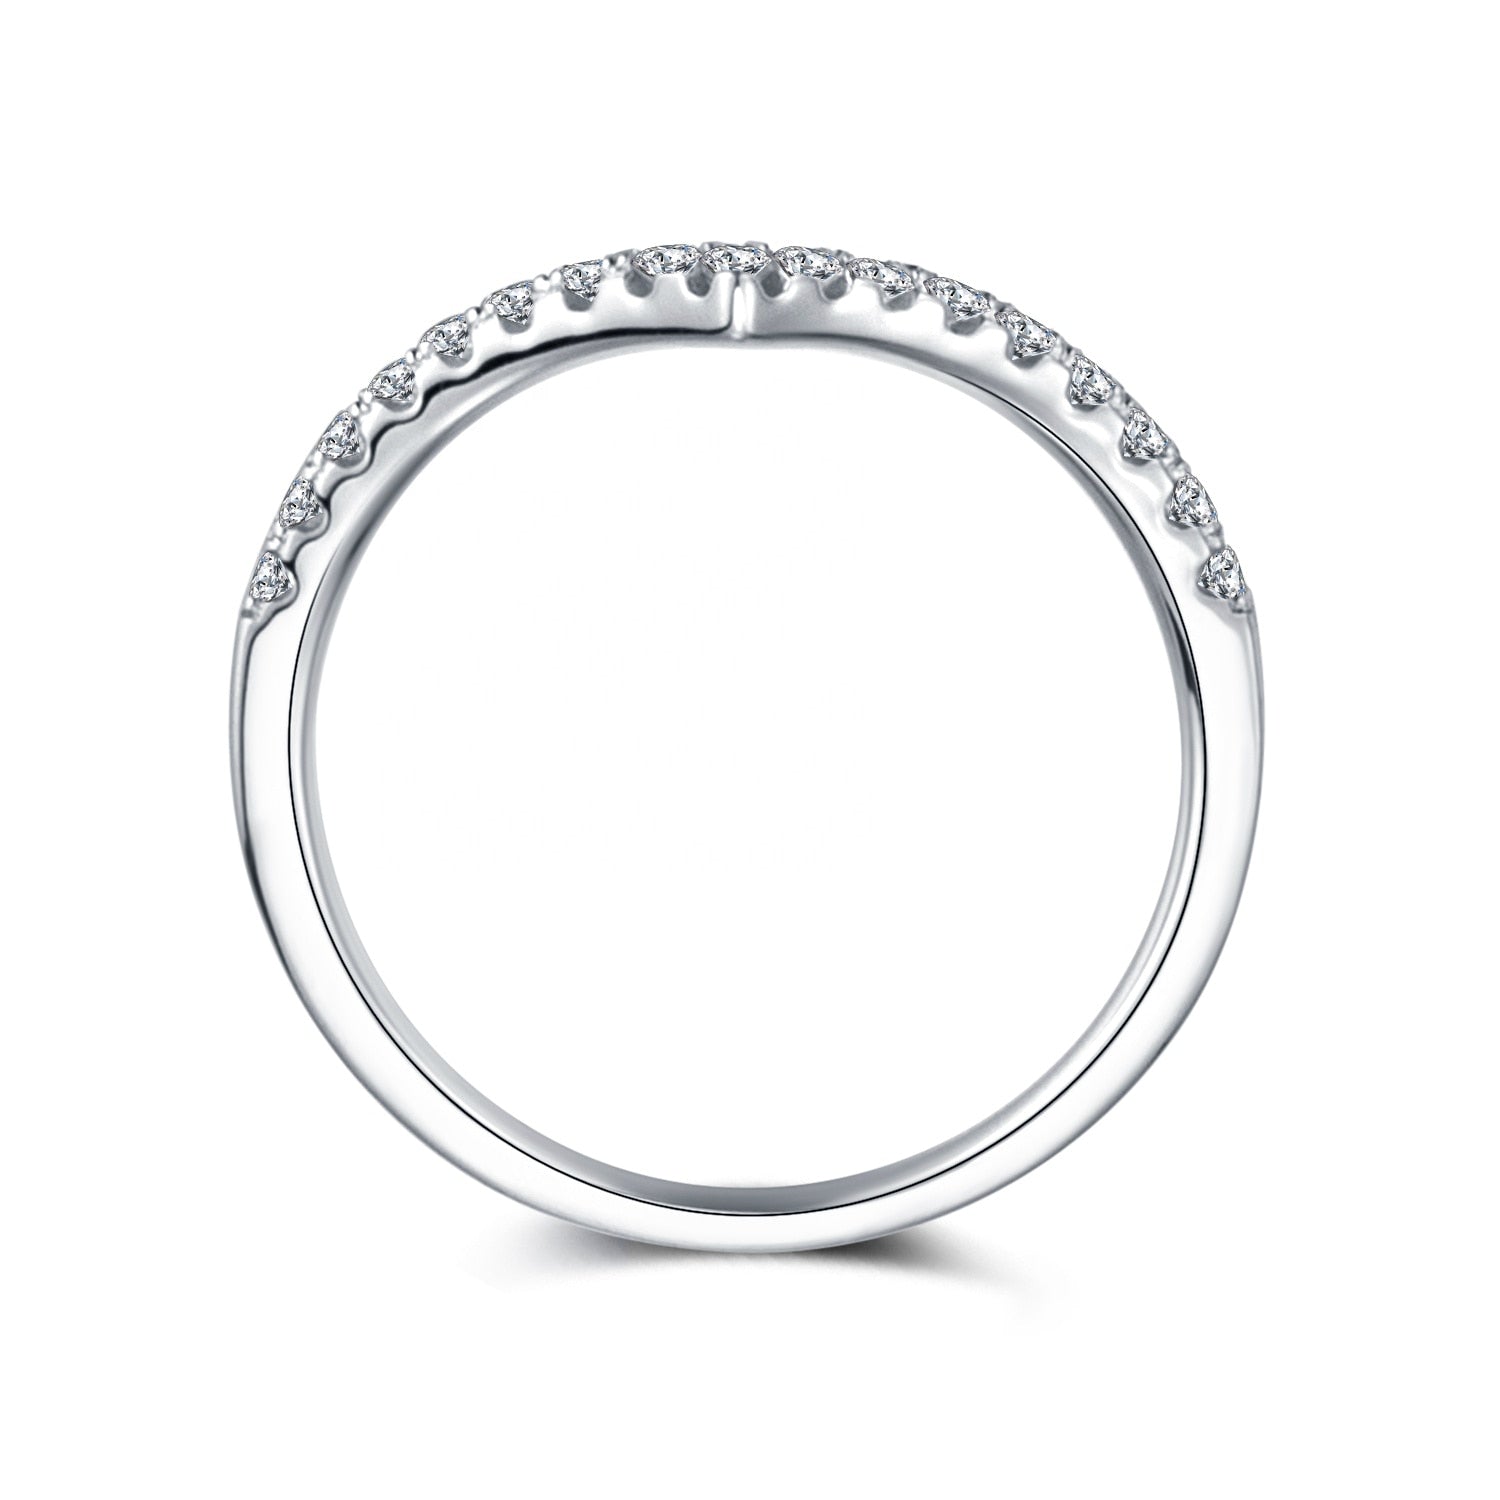 A silver chevron style eternity wedding ring prong set with moissanites